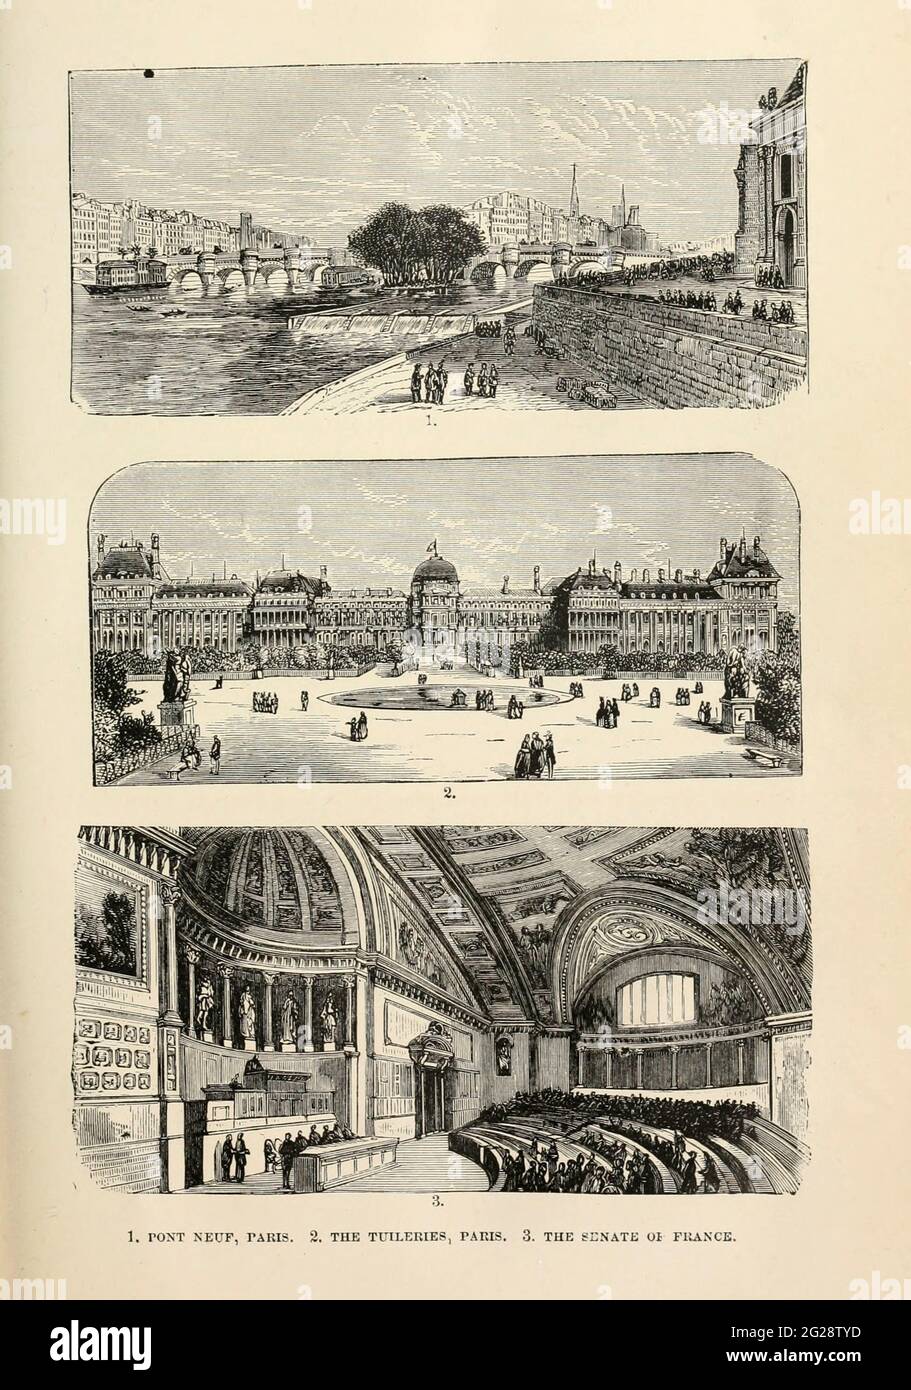 Paris Views and Buildings 1. PONT NEUF, 2. THE TUILERIES, 3. THE SENATE of FRANCE from the book Sights and sensations in Europe : sketches of travel and adventure in England, Ireland, France, Spain, Portugal, Germany, Switzerland, Italy, Austria, Poland, Hungary, Holland, and Belgium : with an account of the places and persons prominent in the Franco-German war by Browne, Junius Henri, 1833-1902 Published by Hartford, Conn. : American Pub. Co. ; San Francisco, in 1871 Stock Photo